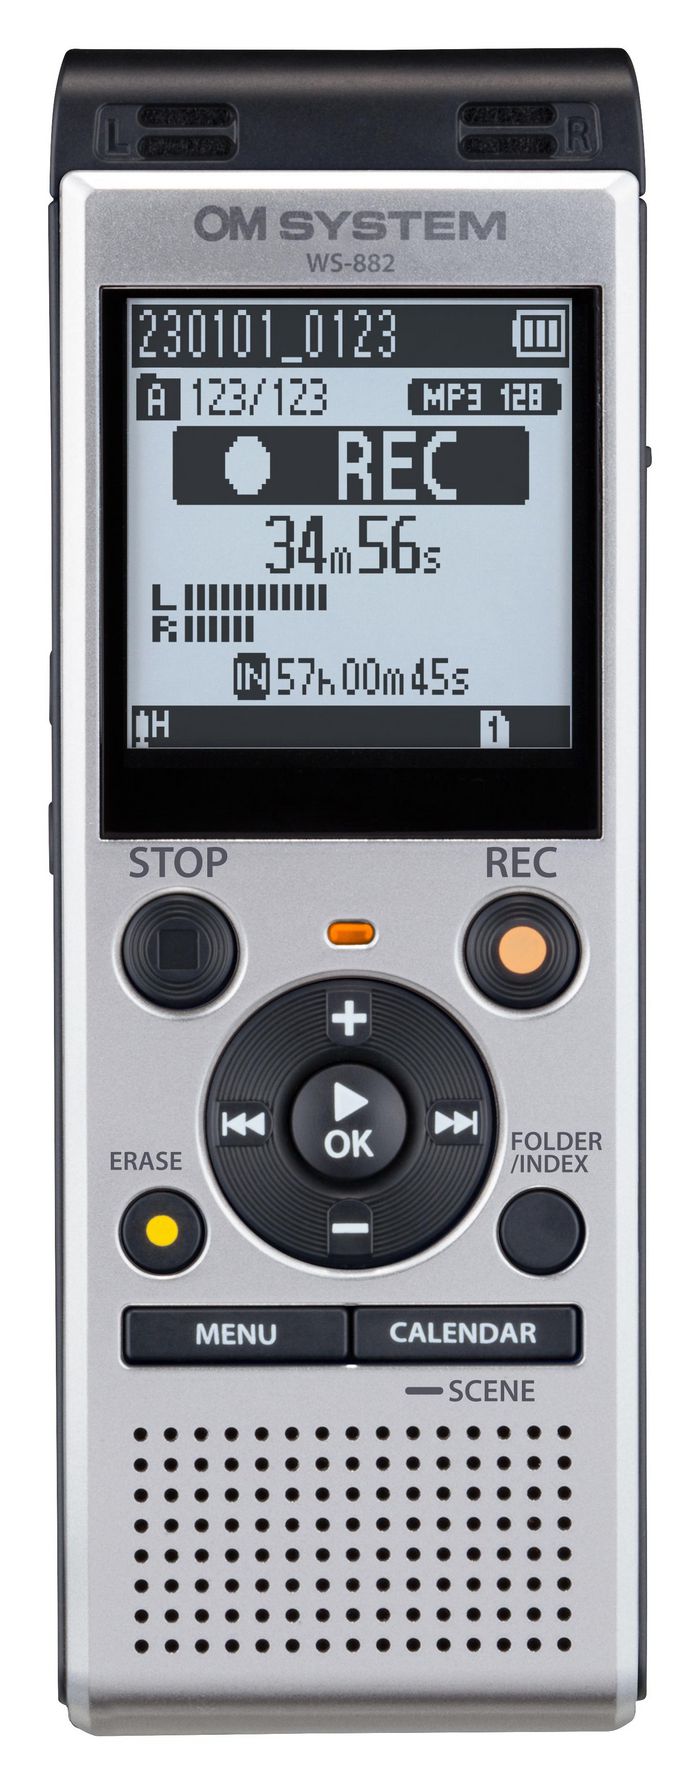 Olympus WS-882 (4GB) Stereo Recorder Silver incl. Batteries - Alkaline - W128246538